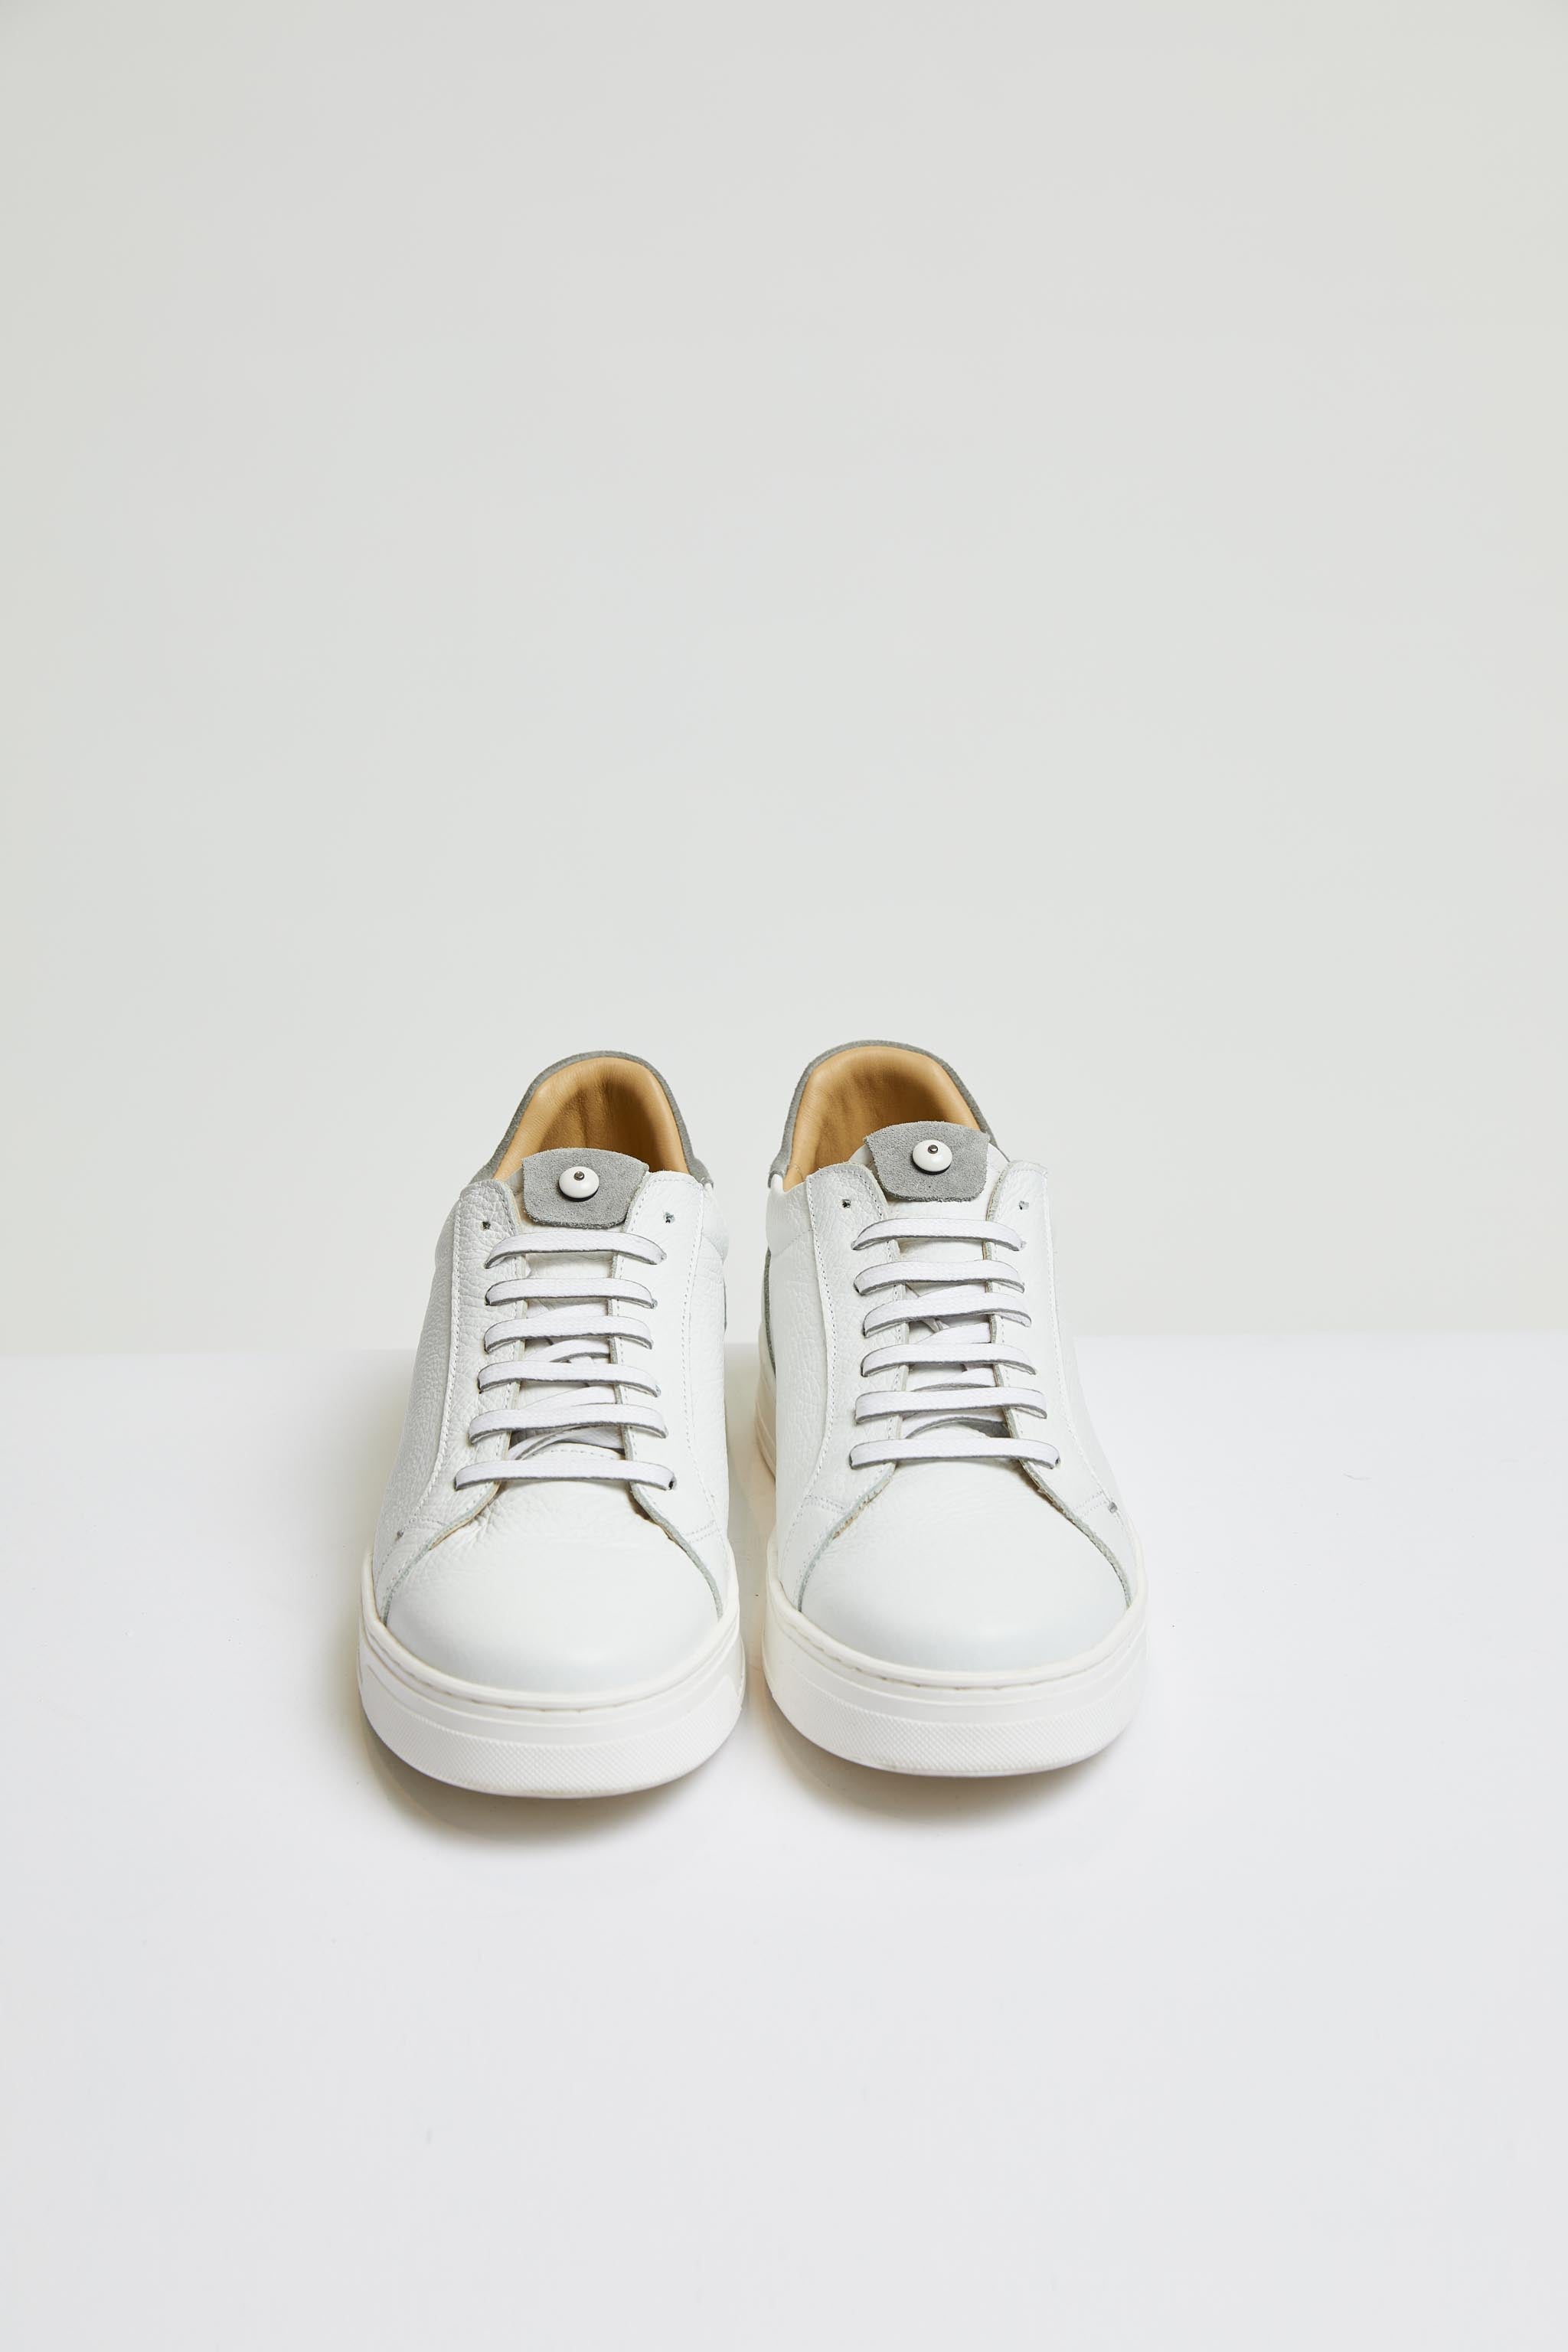 retro-styled tennis shoe in gray